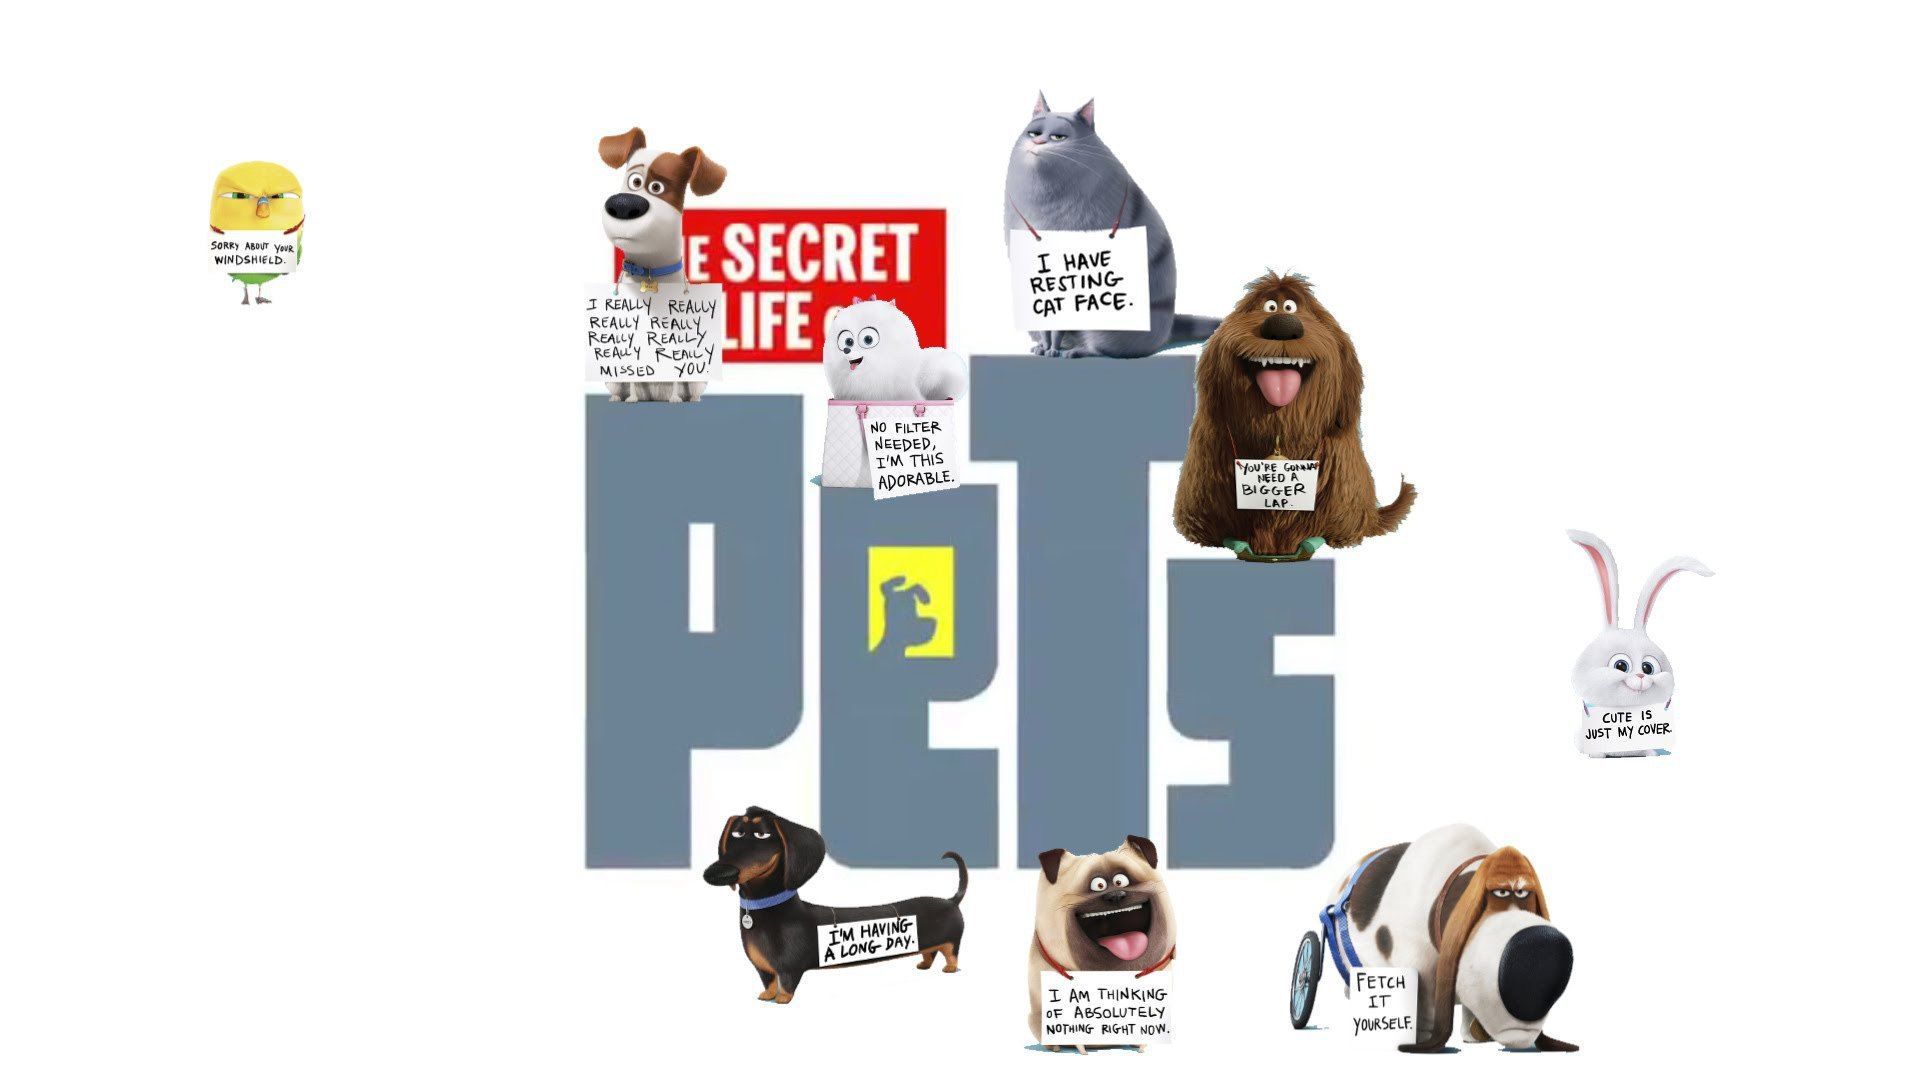 The Secret Life of Pets Snowball and Max Chloe wallpaper HD. Secret life of pets, Secret life, Pets